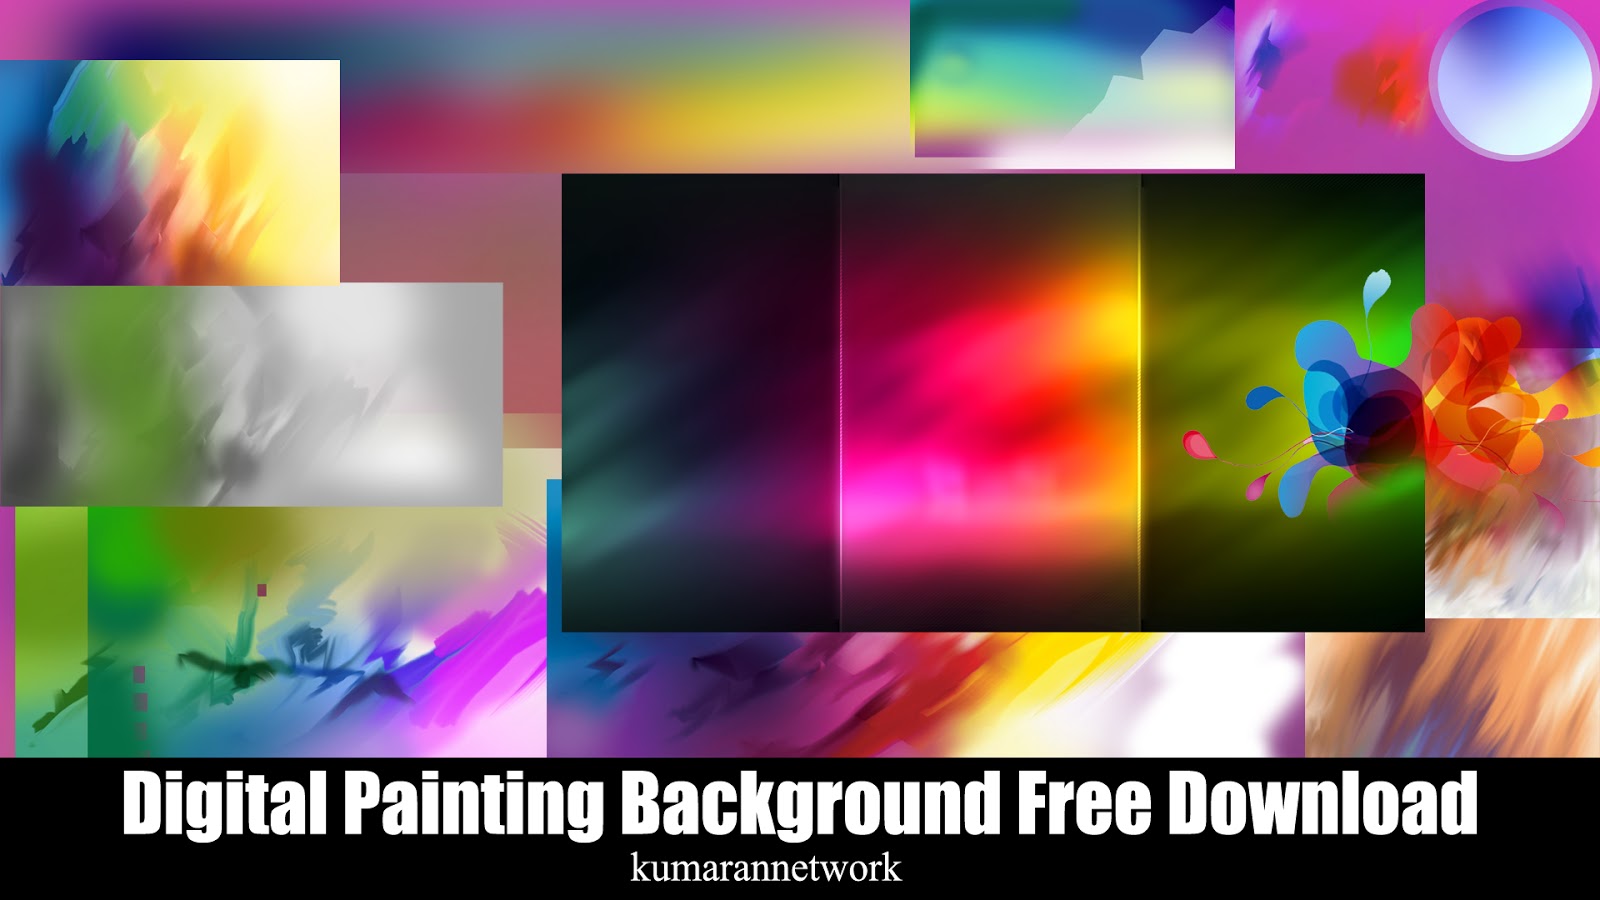 Colorful Textured Background Digital Painting HighRes Vector Graphic   Getty Images